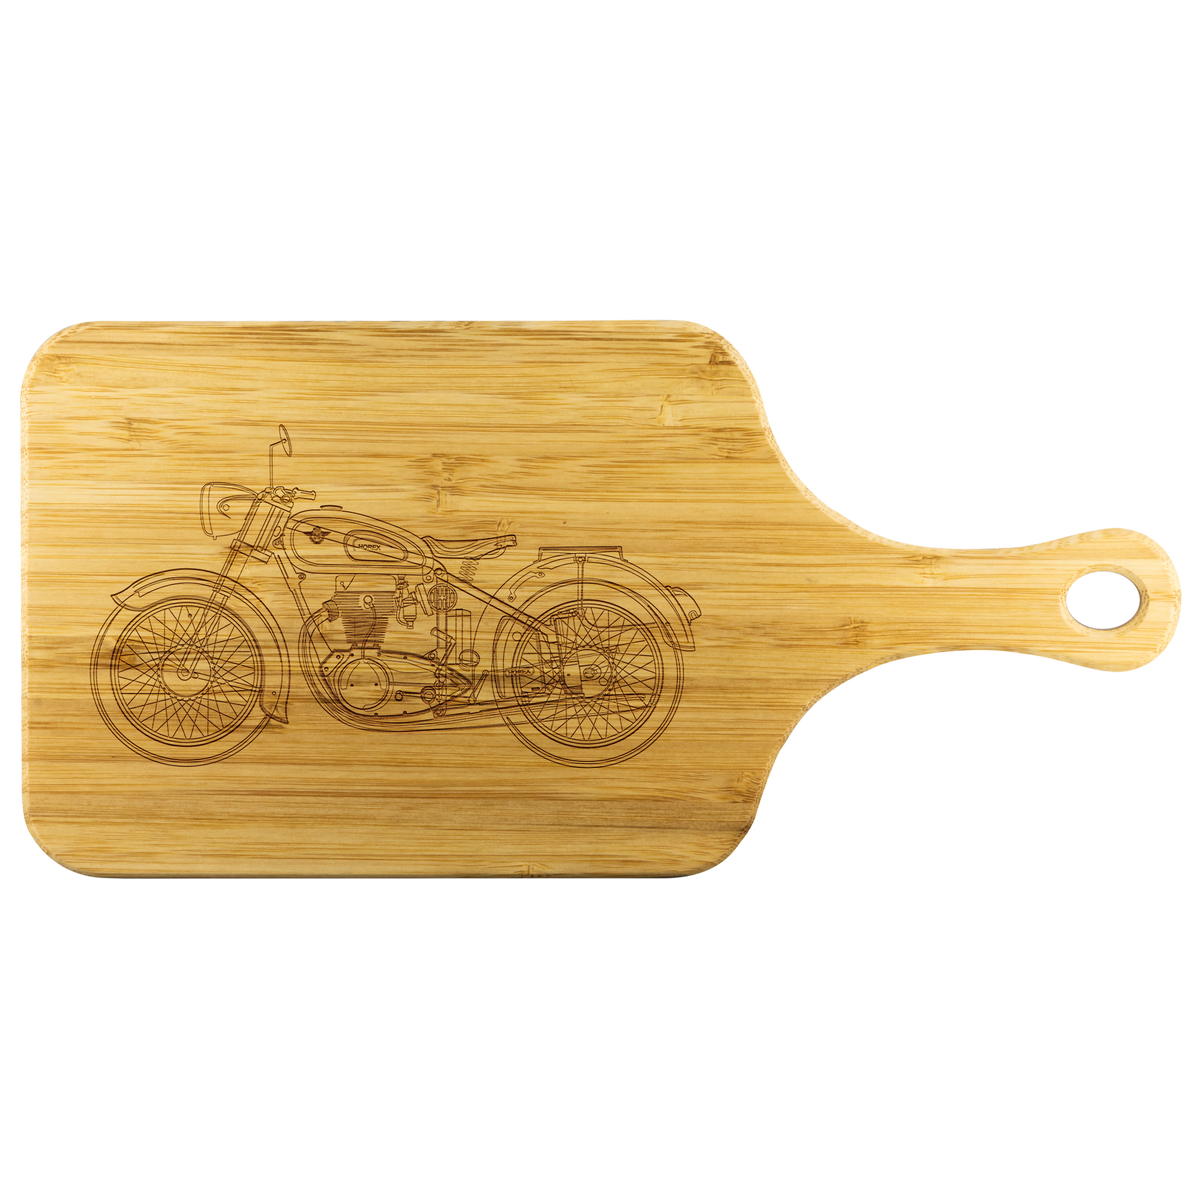 Motor Cycle - Wood Cutting Board With Handle